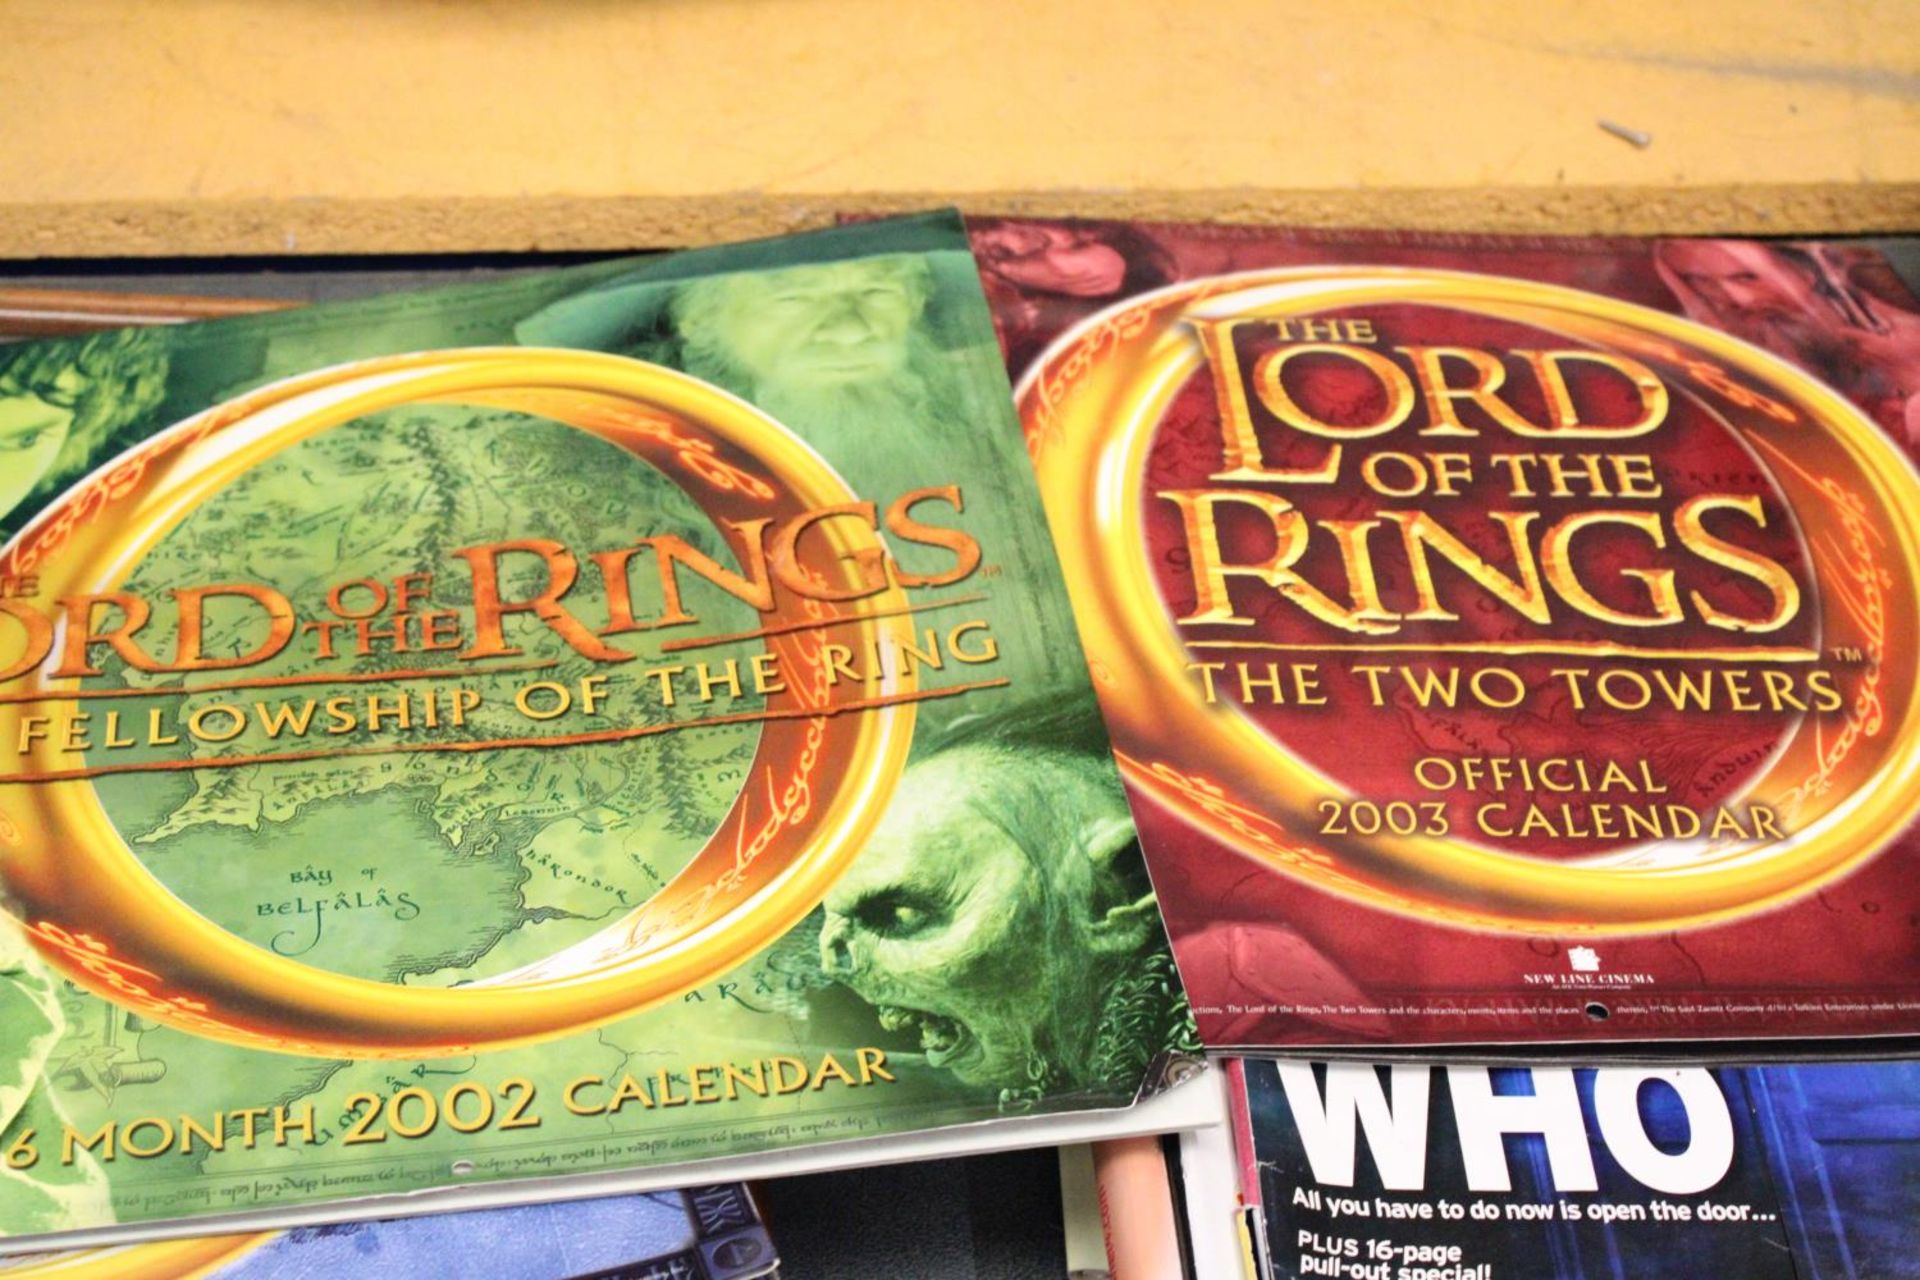 A QUANTITY OF RADIO TIMES MAGAZINES WITH A FURTHER THREE LORD OF THE RINGS CALENDARS - Image 2 of 4